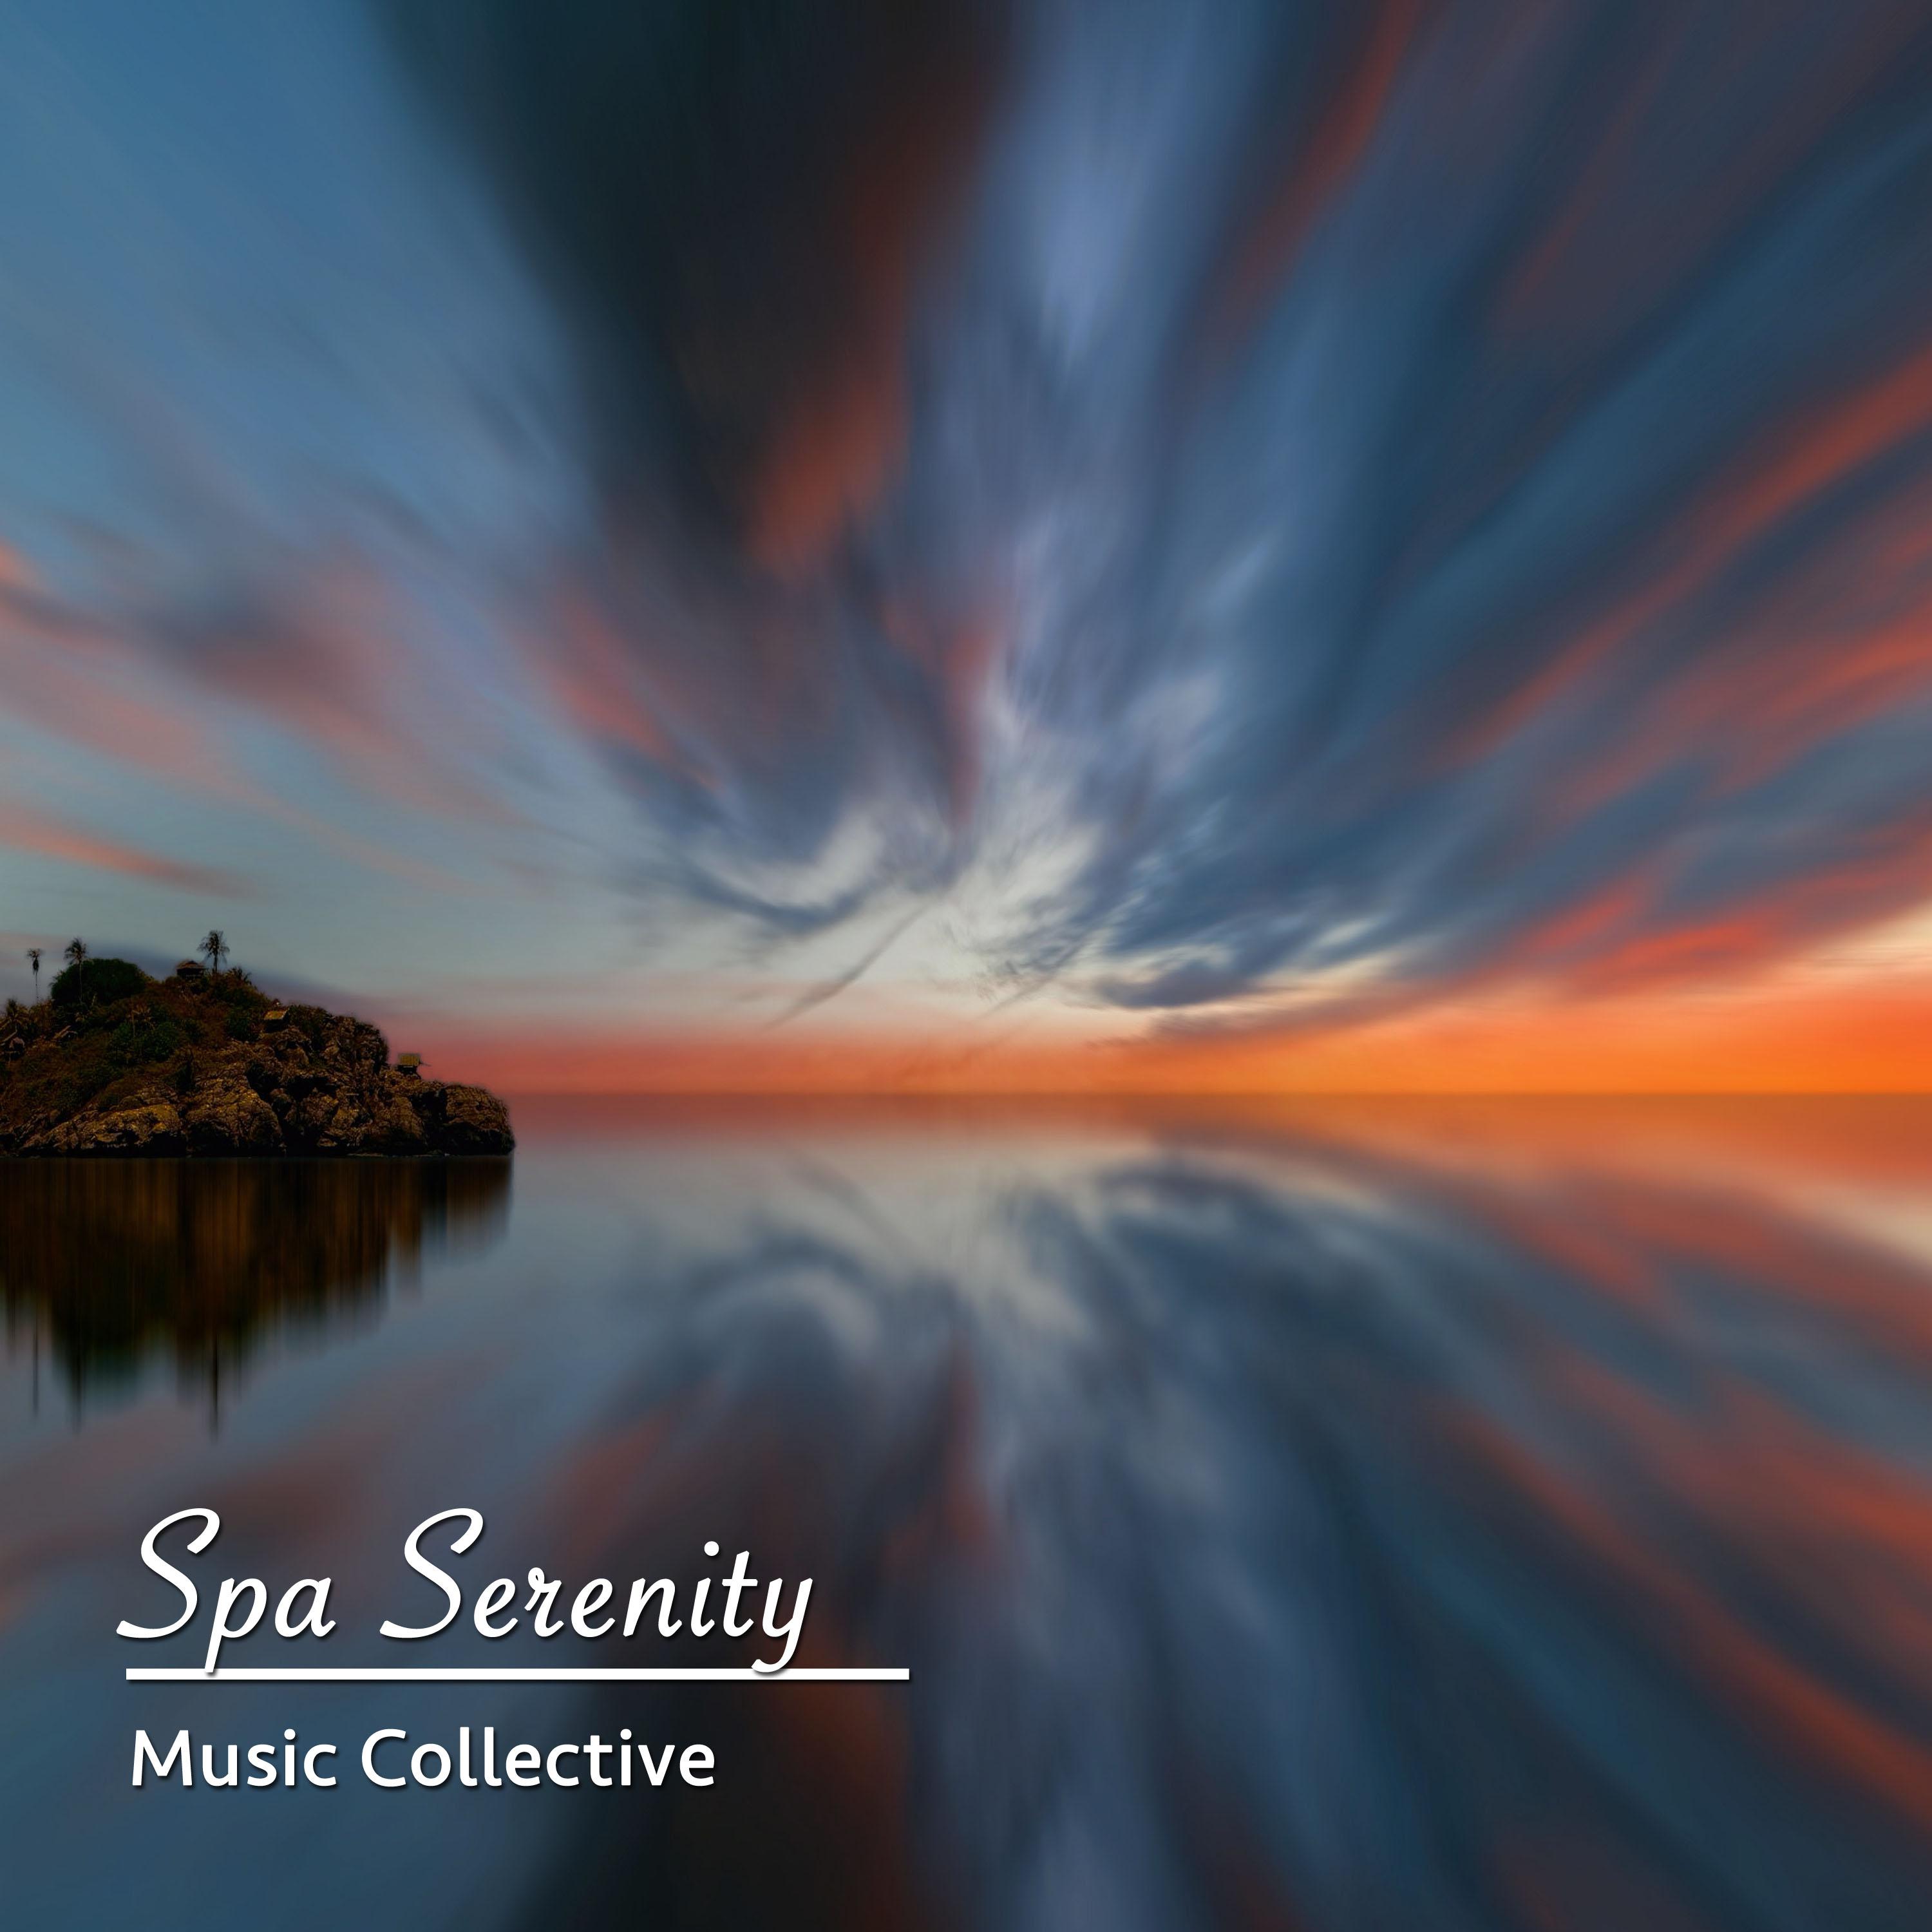 11 Spa Serenity: Music Collective